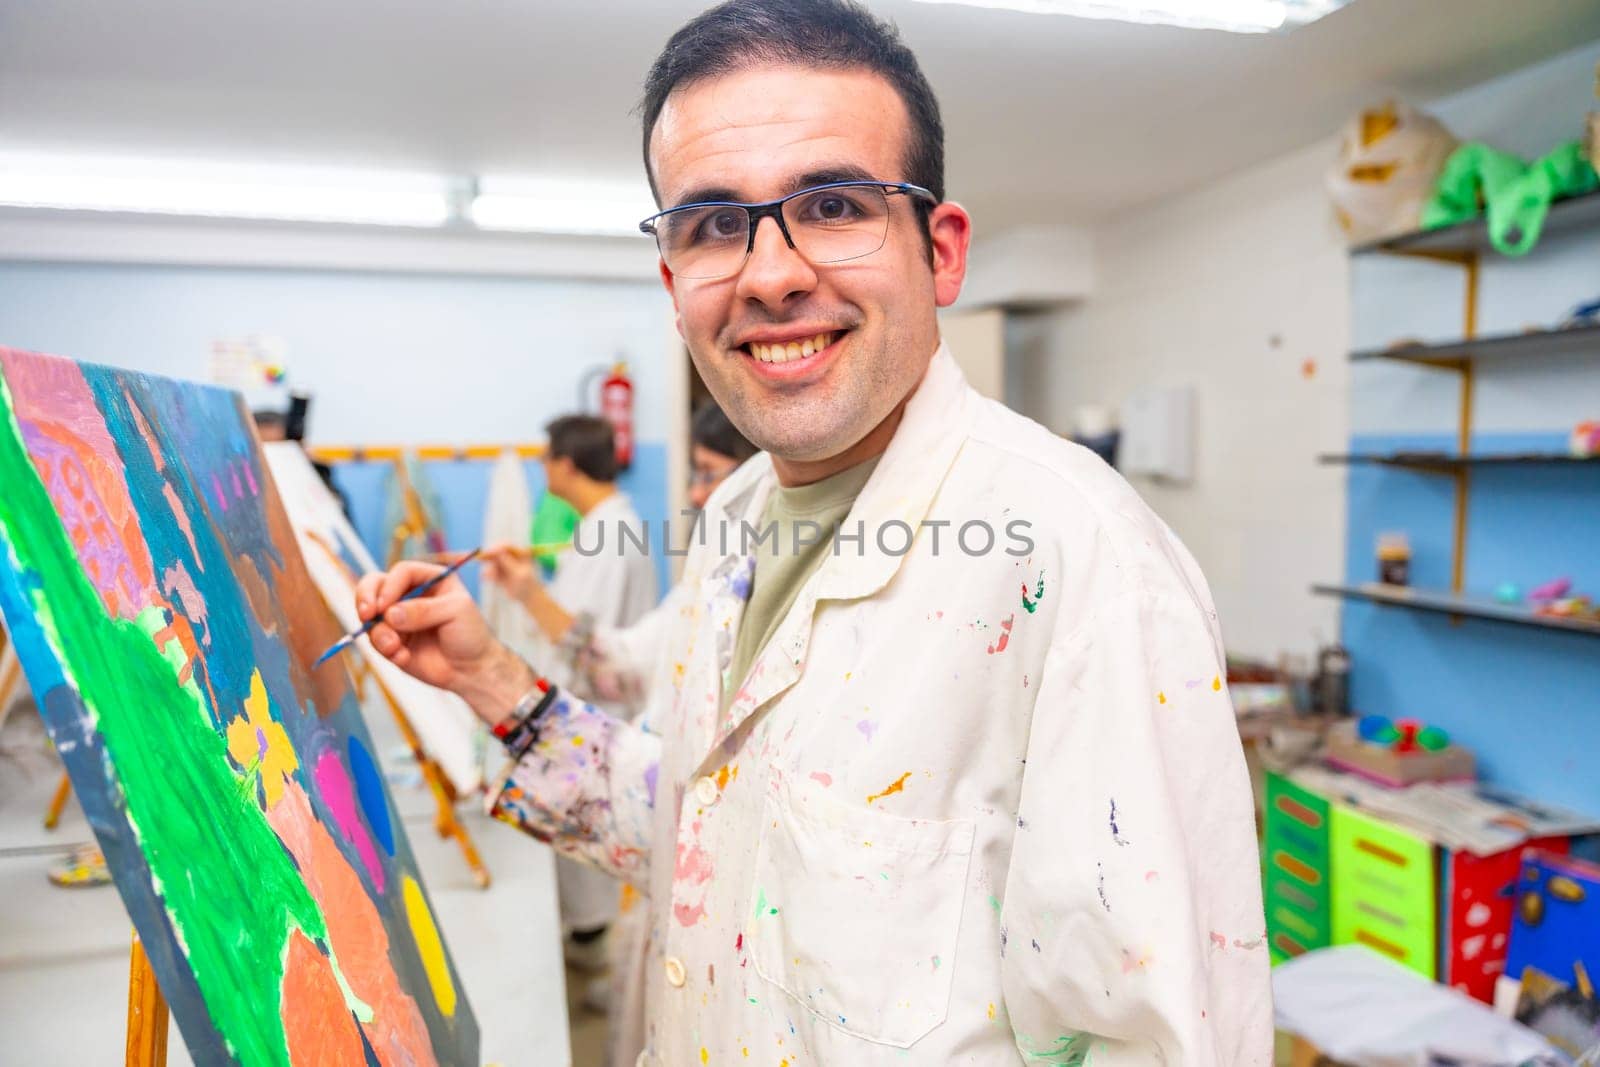 Disabled man looking at camera and smiling happy while painting on canvas